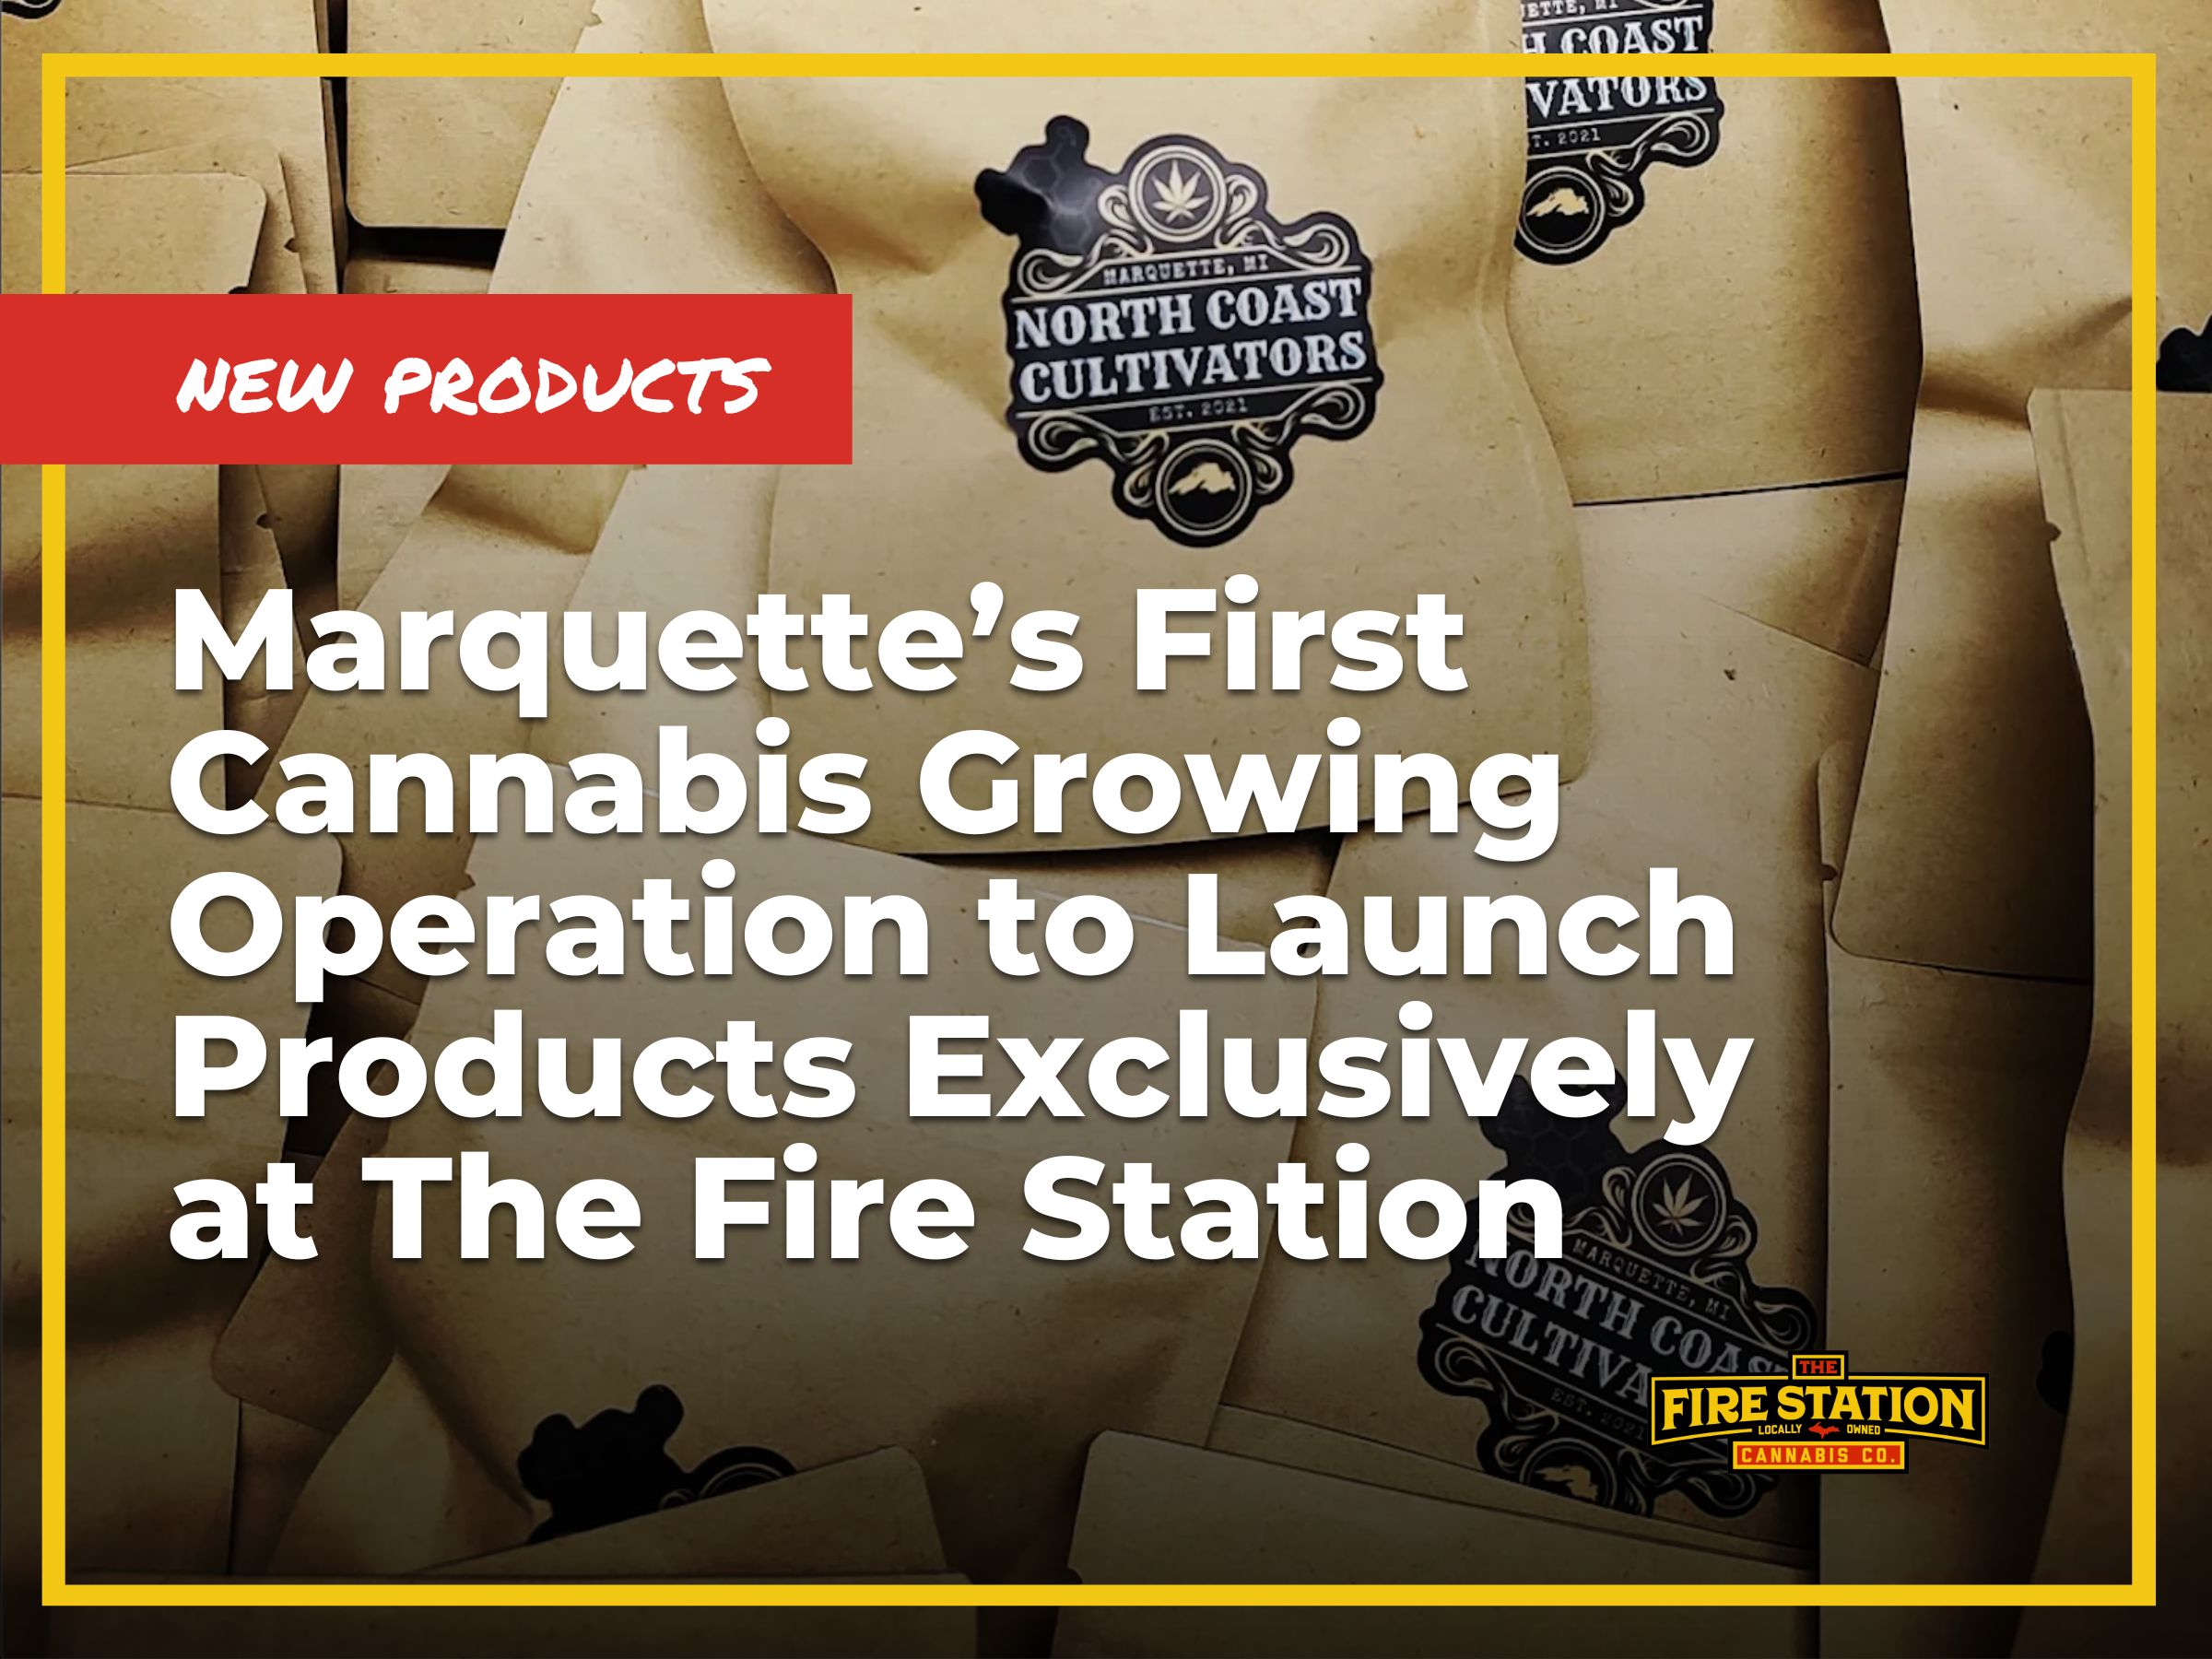 Marquette’s First Cannabis Growing Operation to Launch Products at The Fire Station